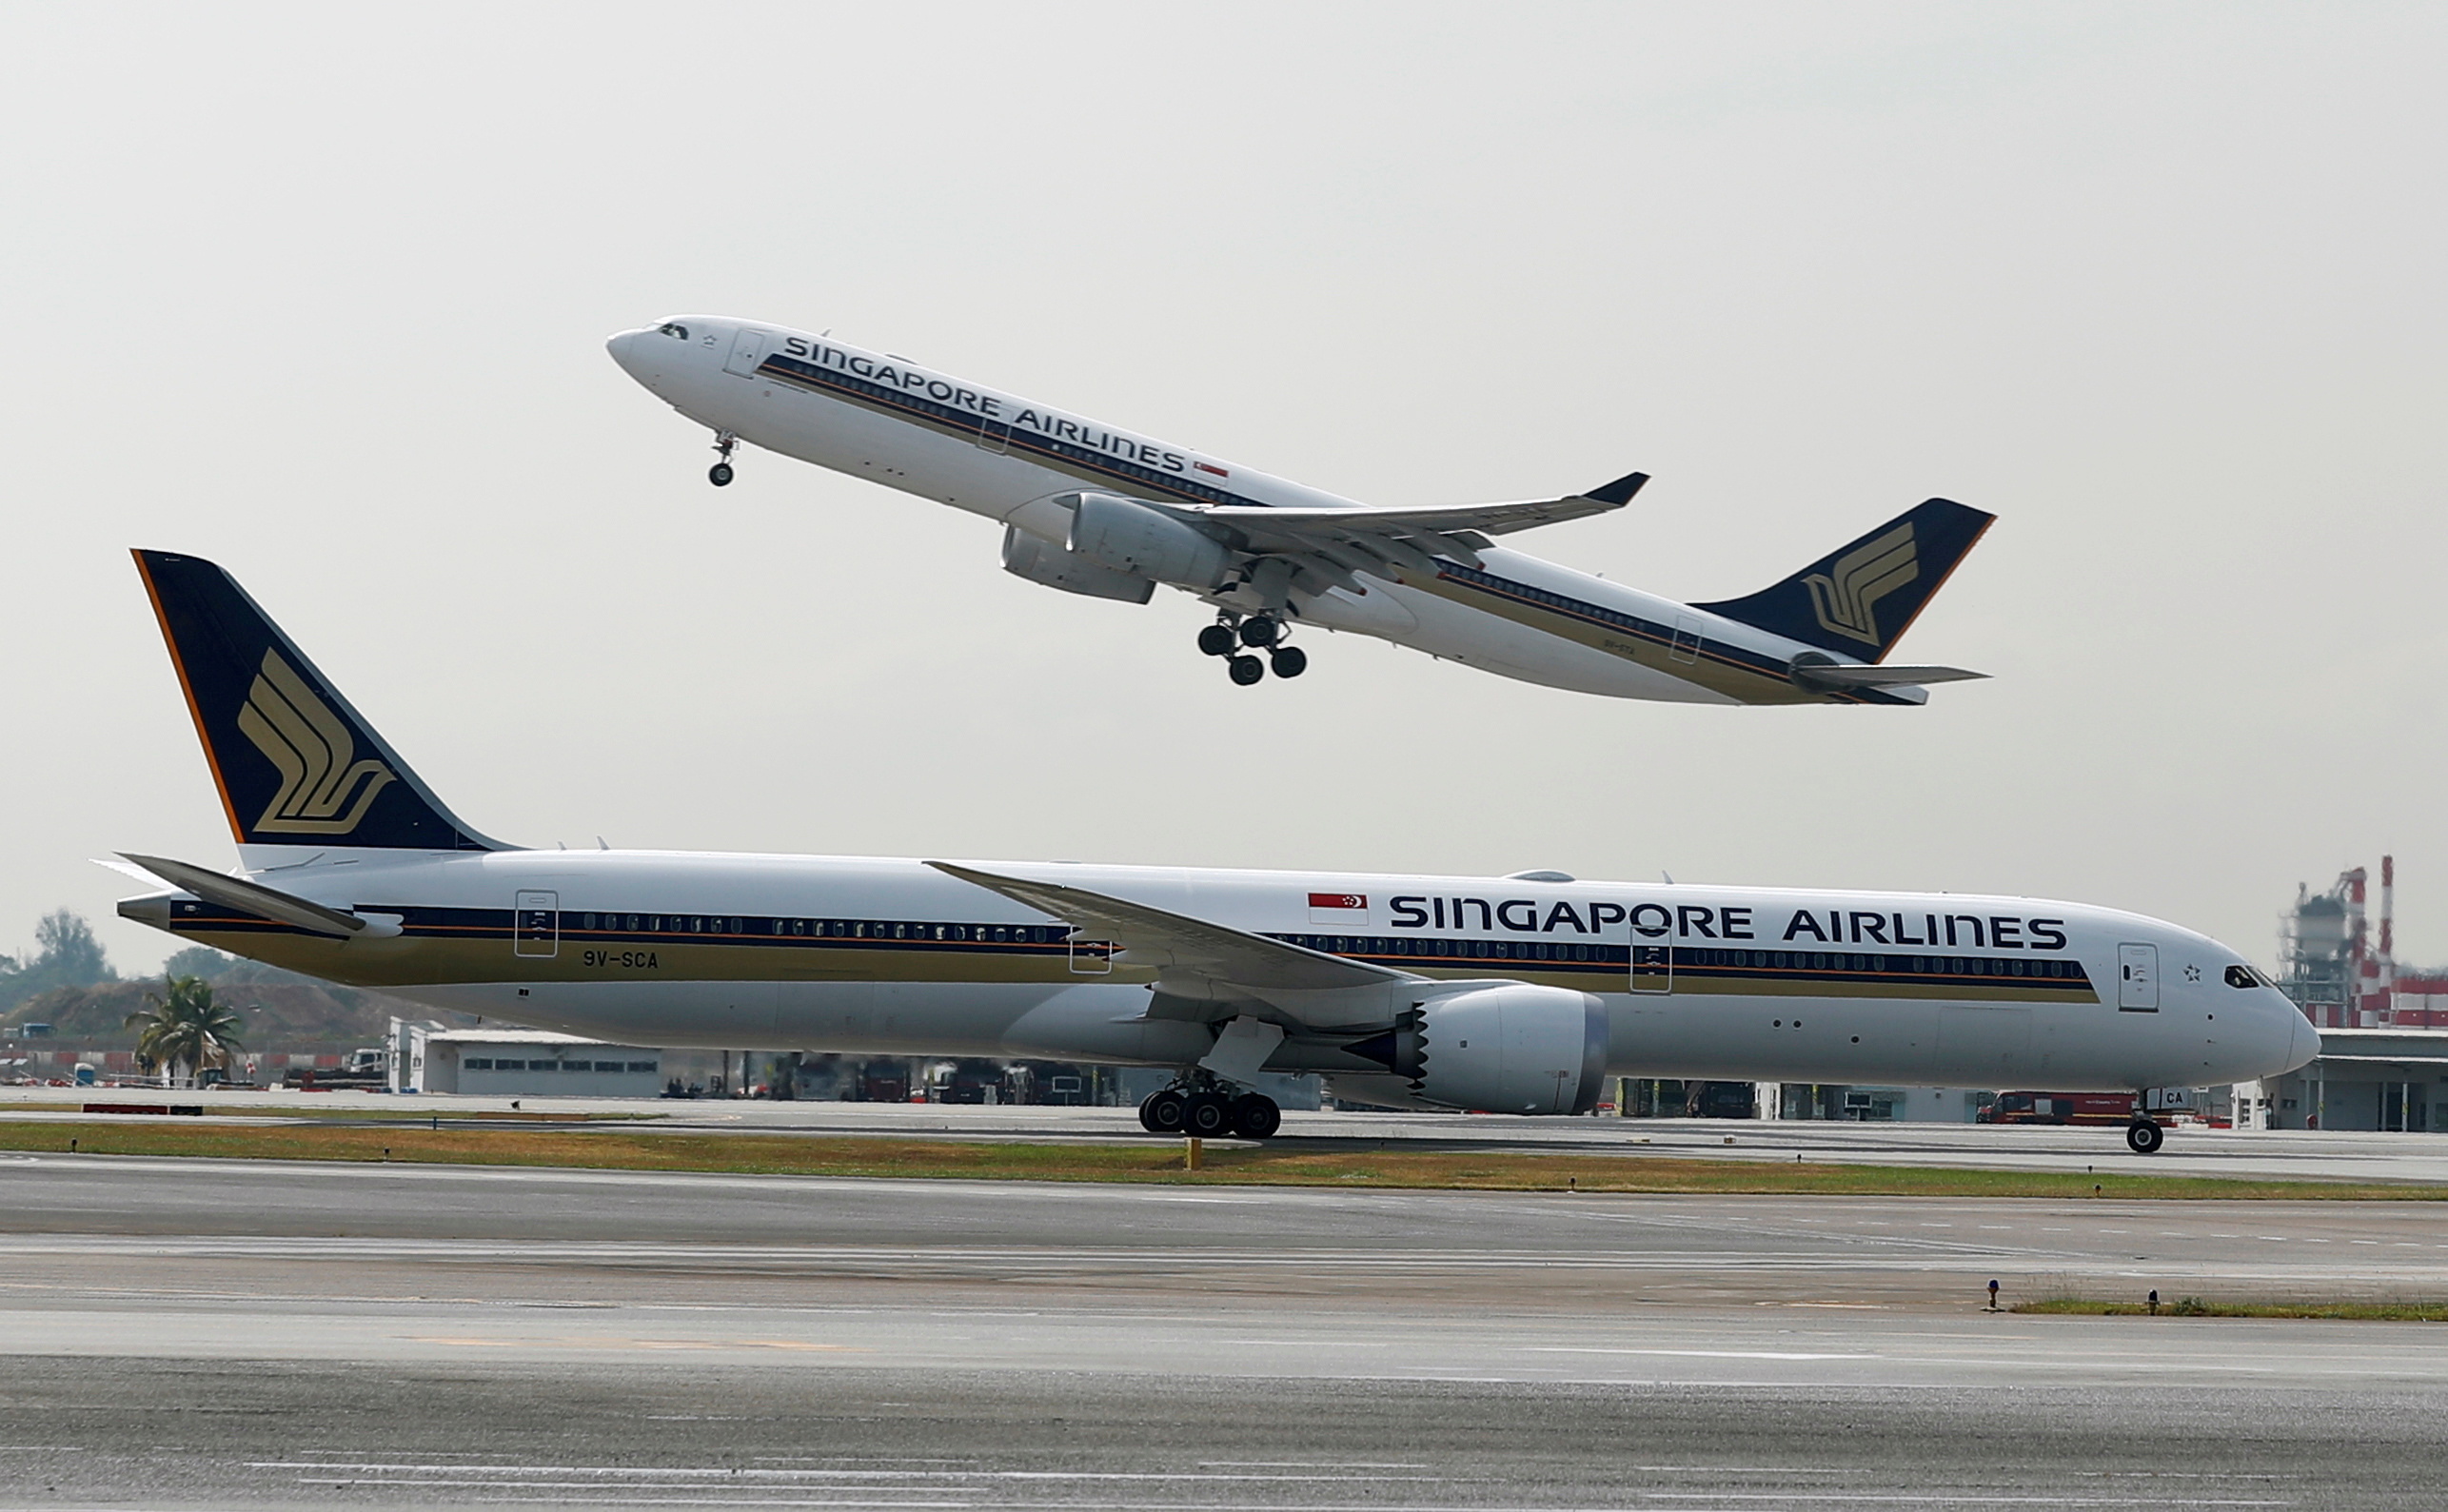 A Singapore Airlines Airbus A330 plane takes off behind a Boeing 787 Dreamliner at Changi Airport in Singapore